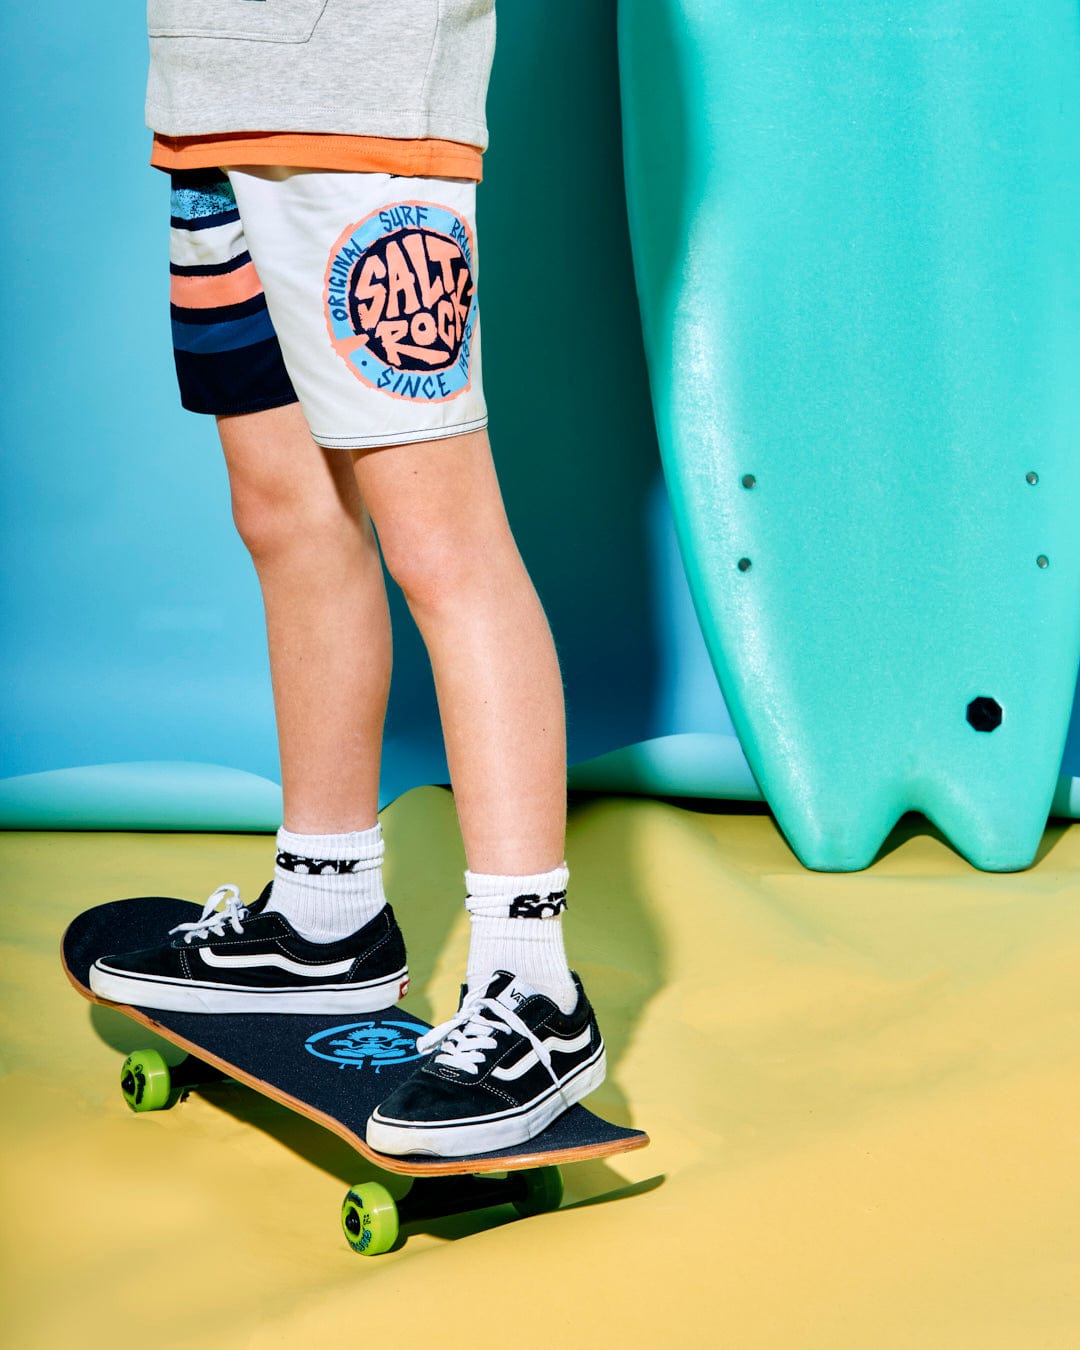 Young person wearing Saltrock Original SR - Kids Swimshorts - Blue with an elasticated waist and black sneakers, standing on a skateboard next to a bright turquoise surfboard, against a blue and yellow backdrop.